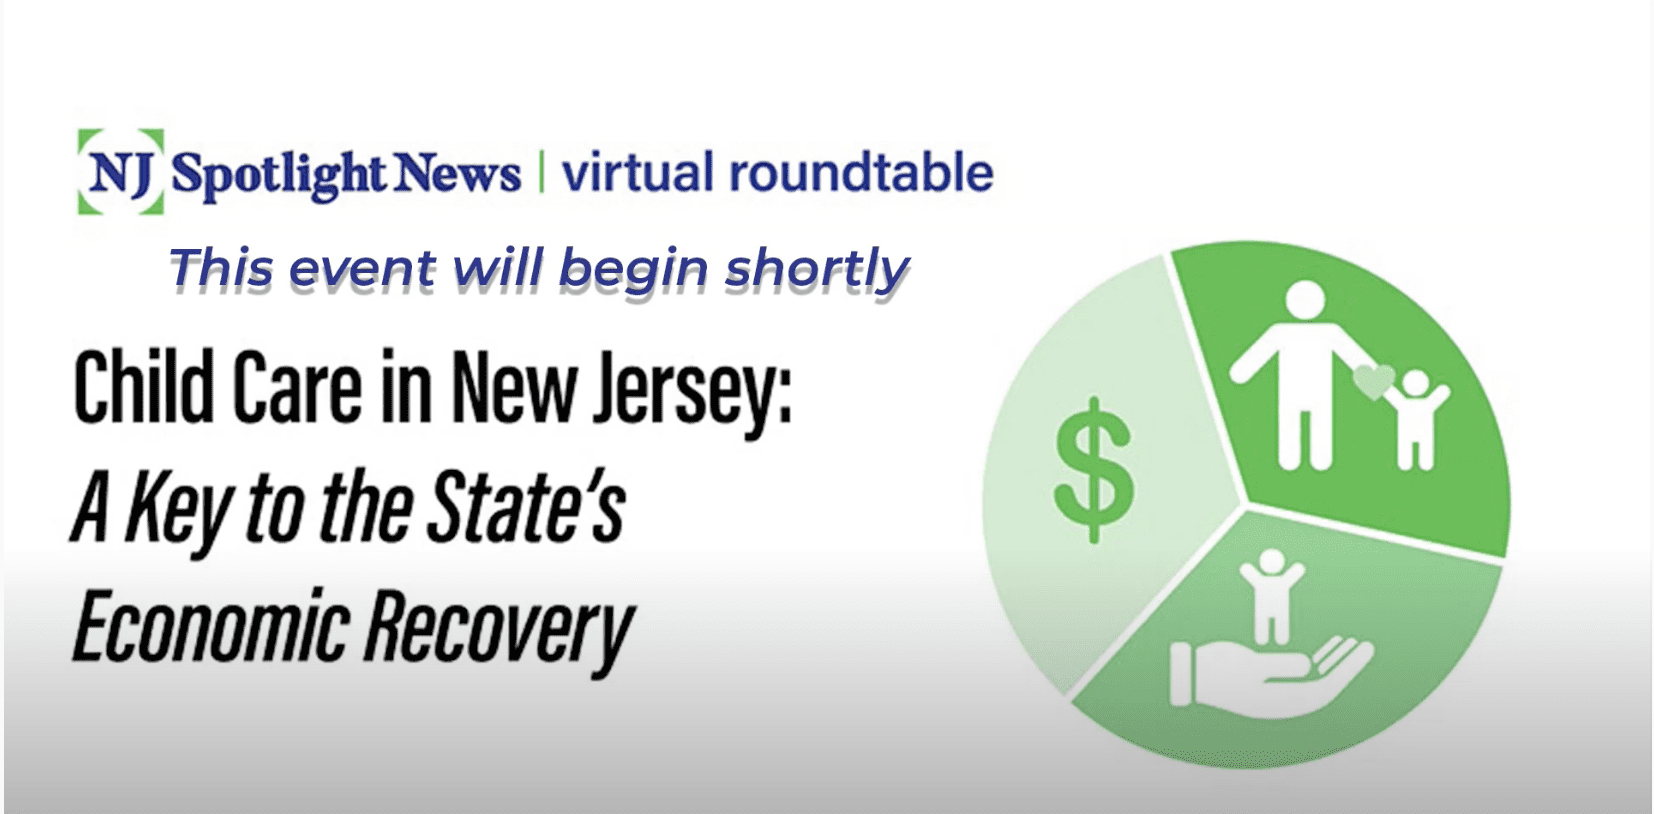 NJ Spotlight News Virtual Roundtable – Child Care in New Jersey: A Key to the State’s Economic Recovery